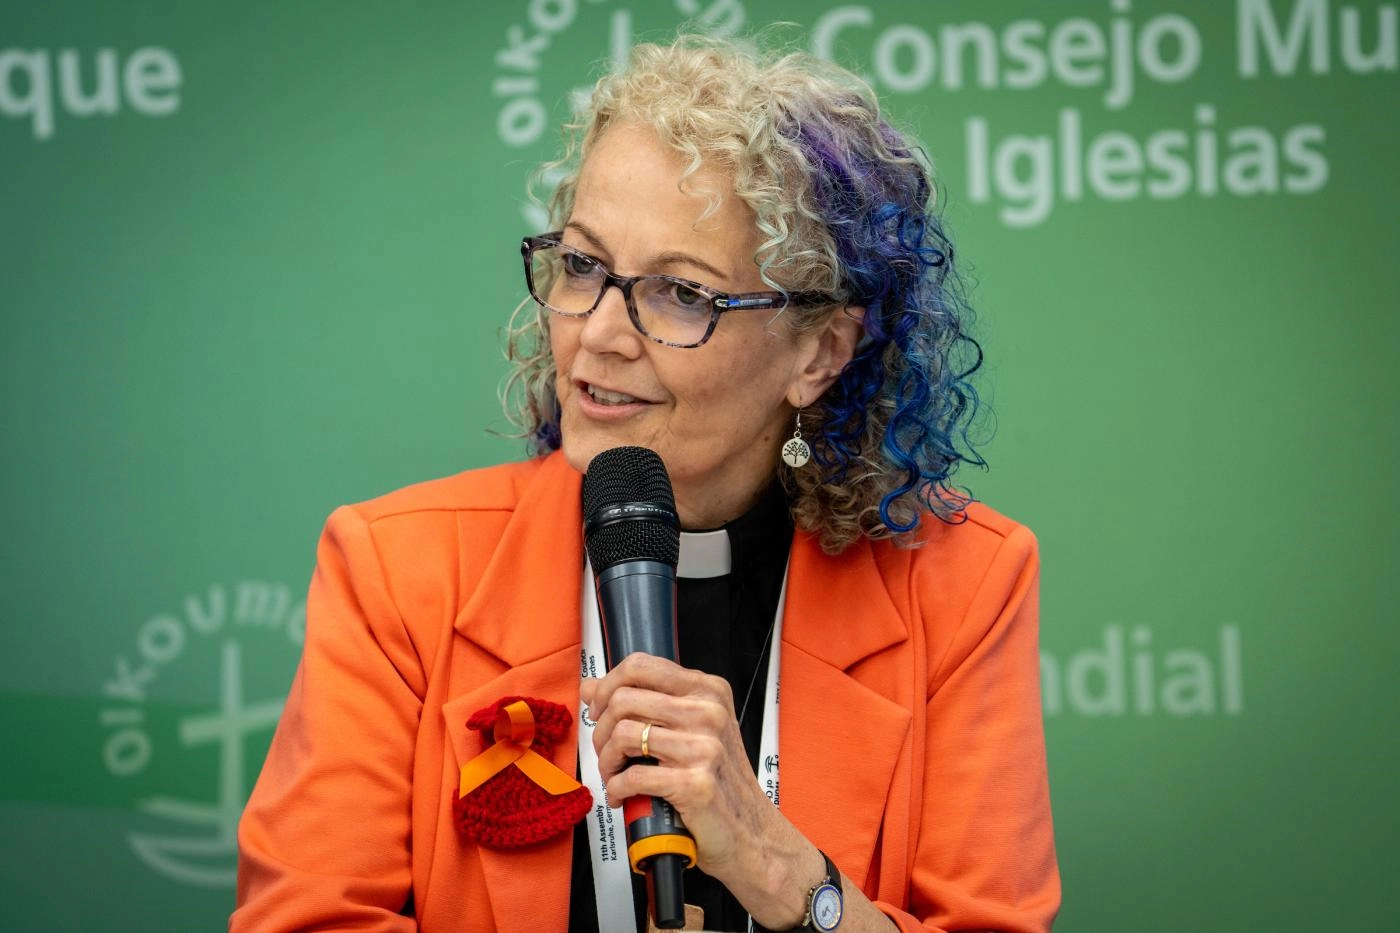 Rev. Prof. Dr Sandra Beardsall, member of the WCC Faith and Order Commission addressed a press conference during the 11th assembly of the World Council of Churches in Karlsruhe, Germany